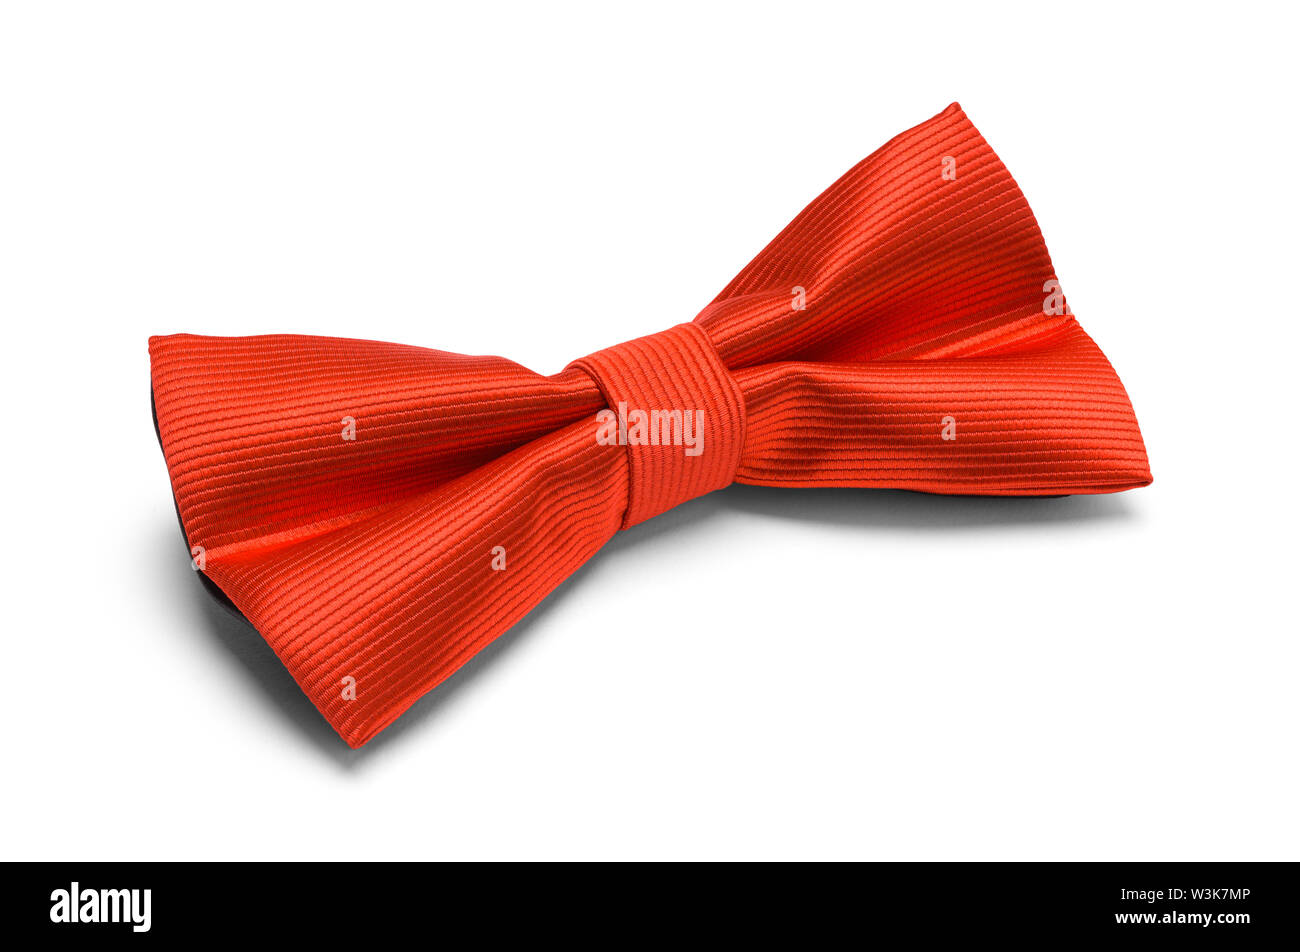 Red Bow Tie Isolated on White Background. Stock Photo